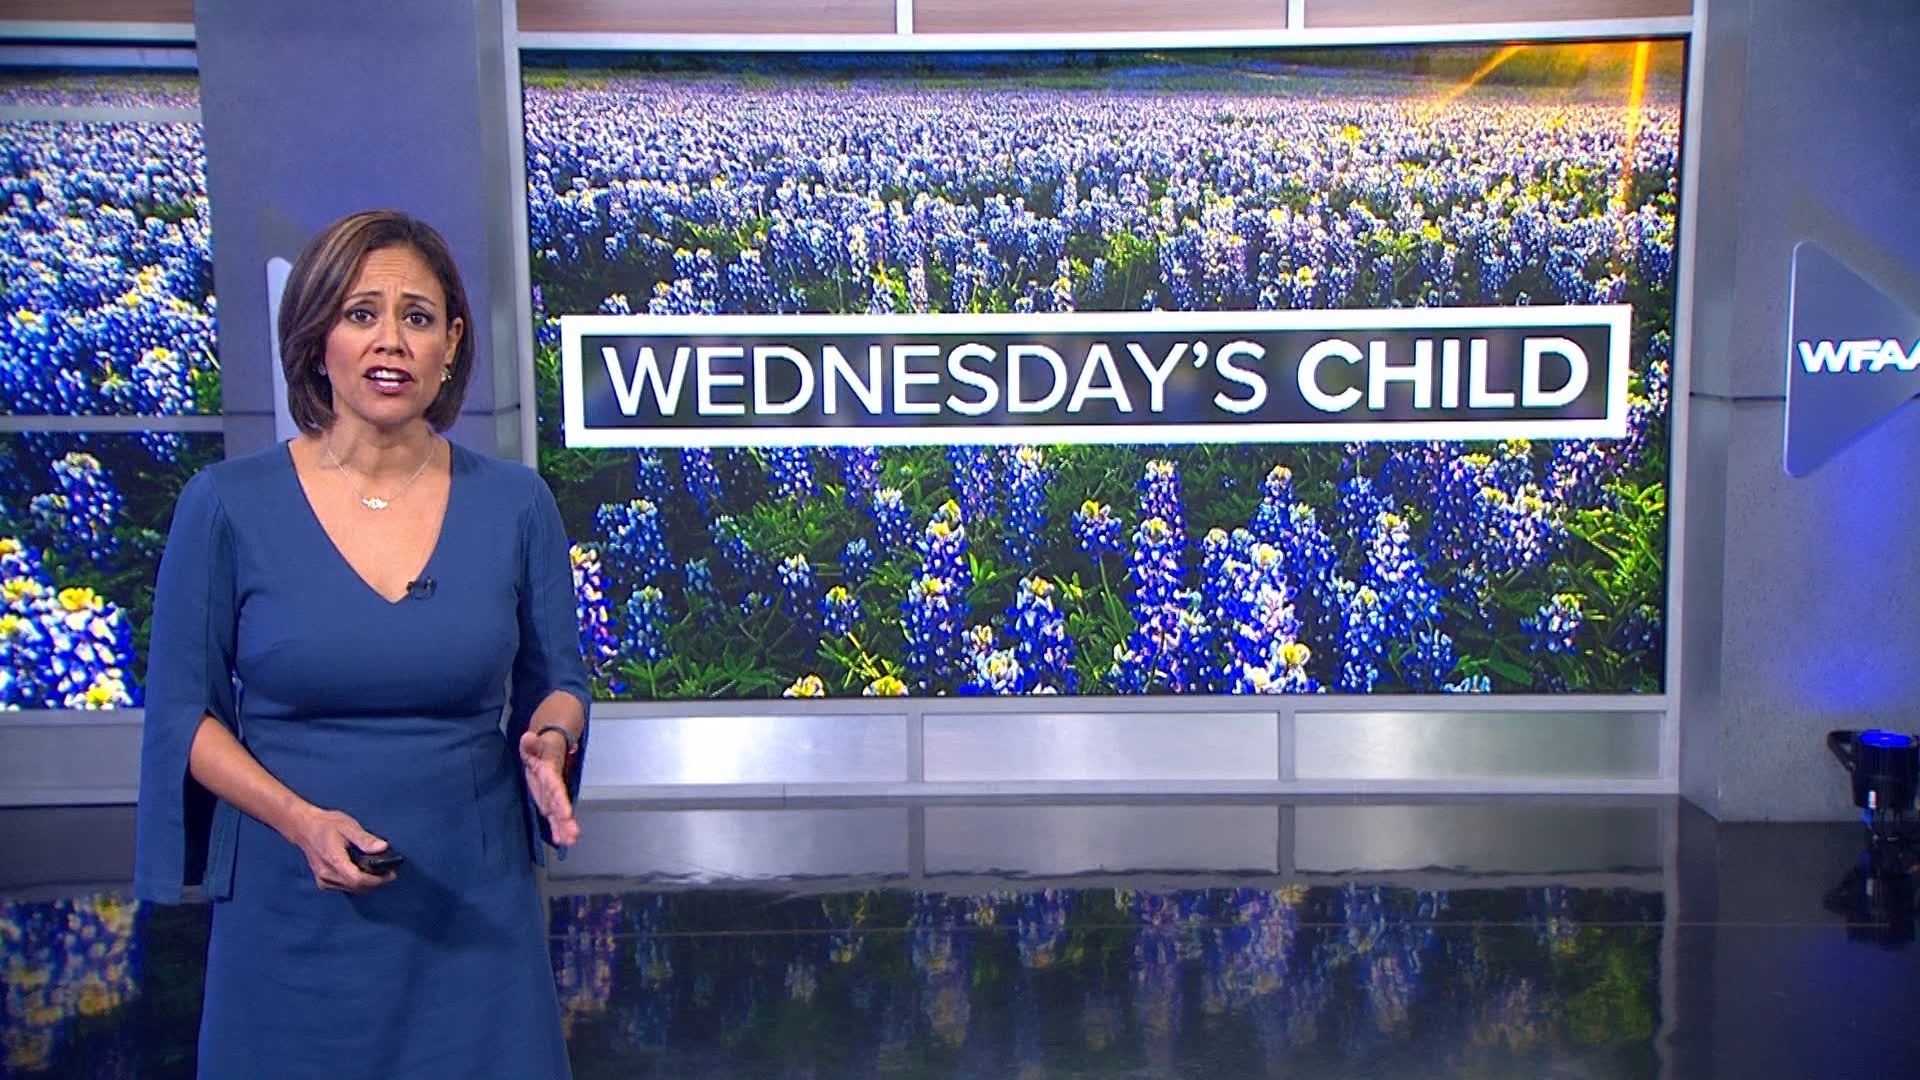 Here's a look back at some of the best Wednesday's Child stories from WFAA in 2023.